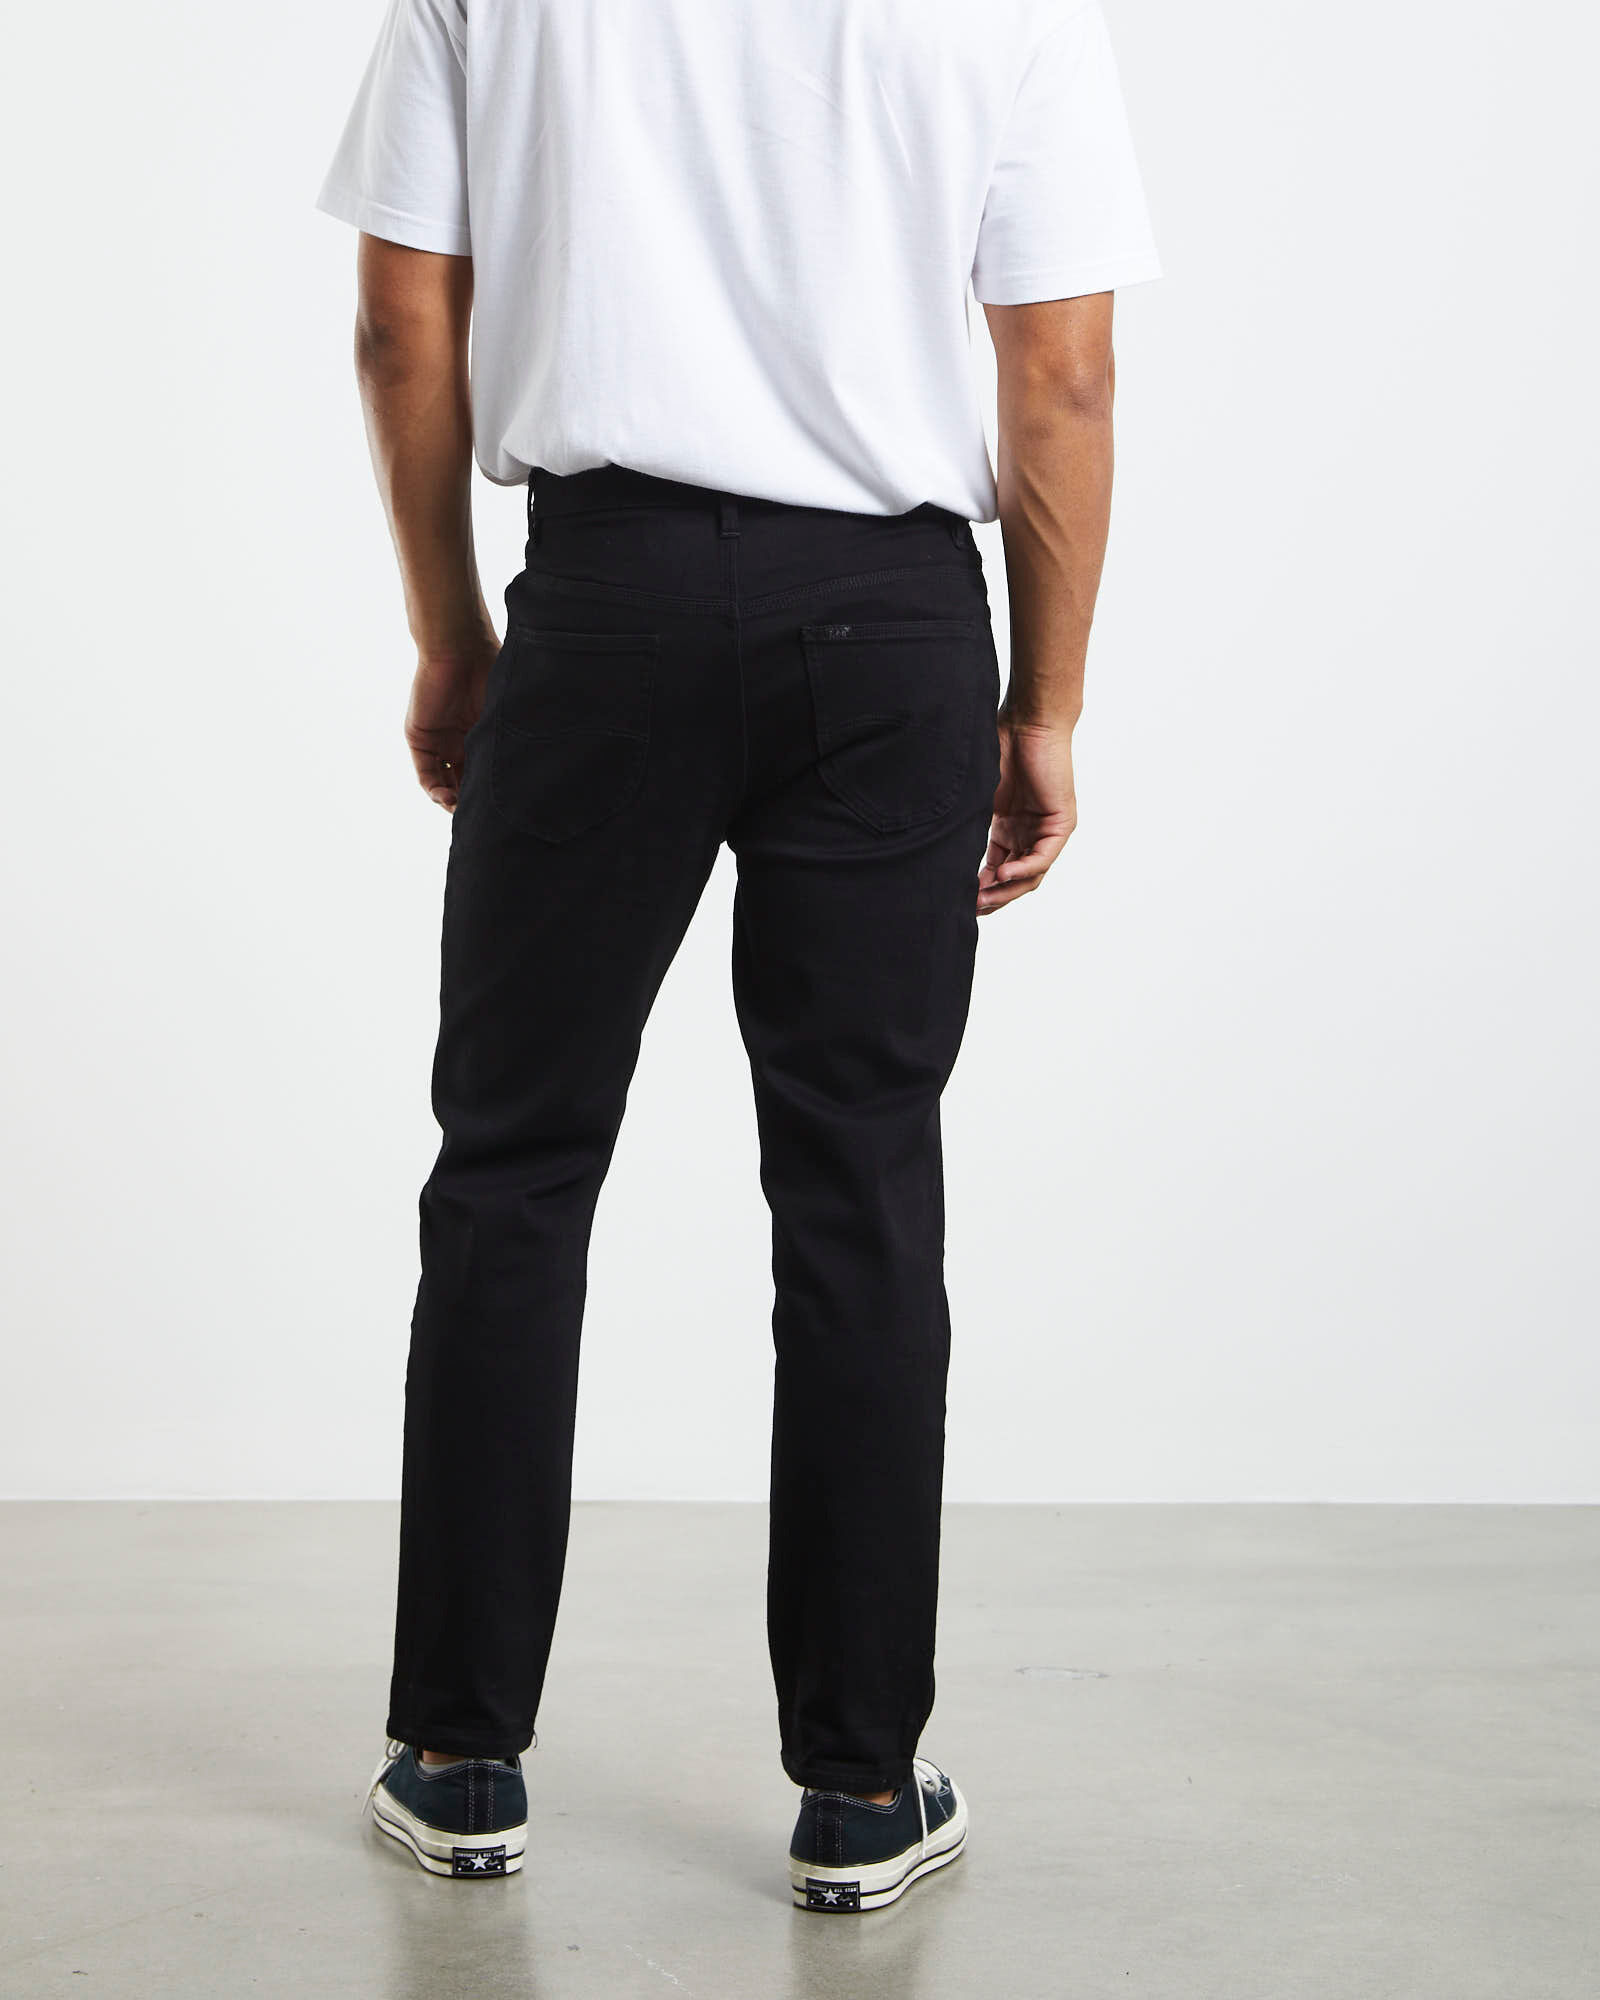 Boncoura 14.5oz 'Type Z' Denim (Relax Tapered Fit) - CORLECTION